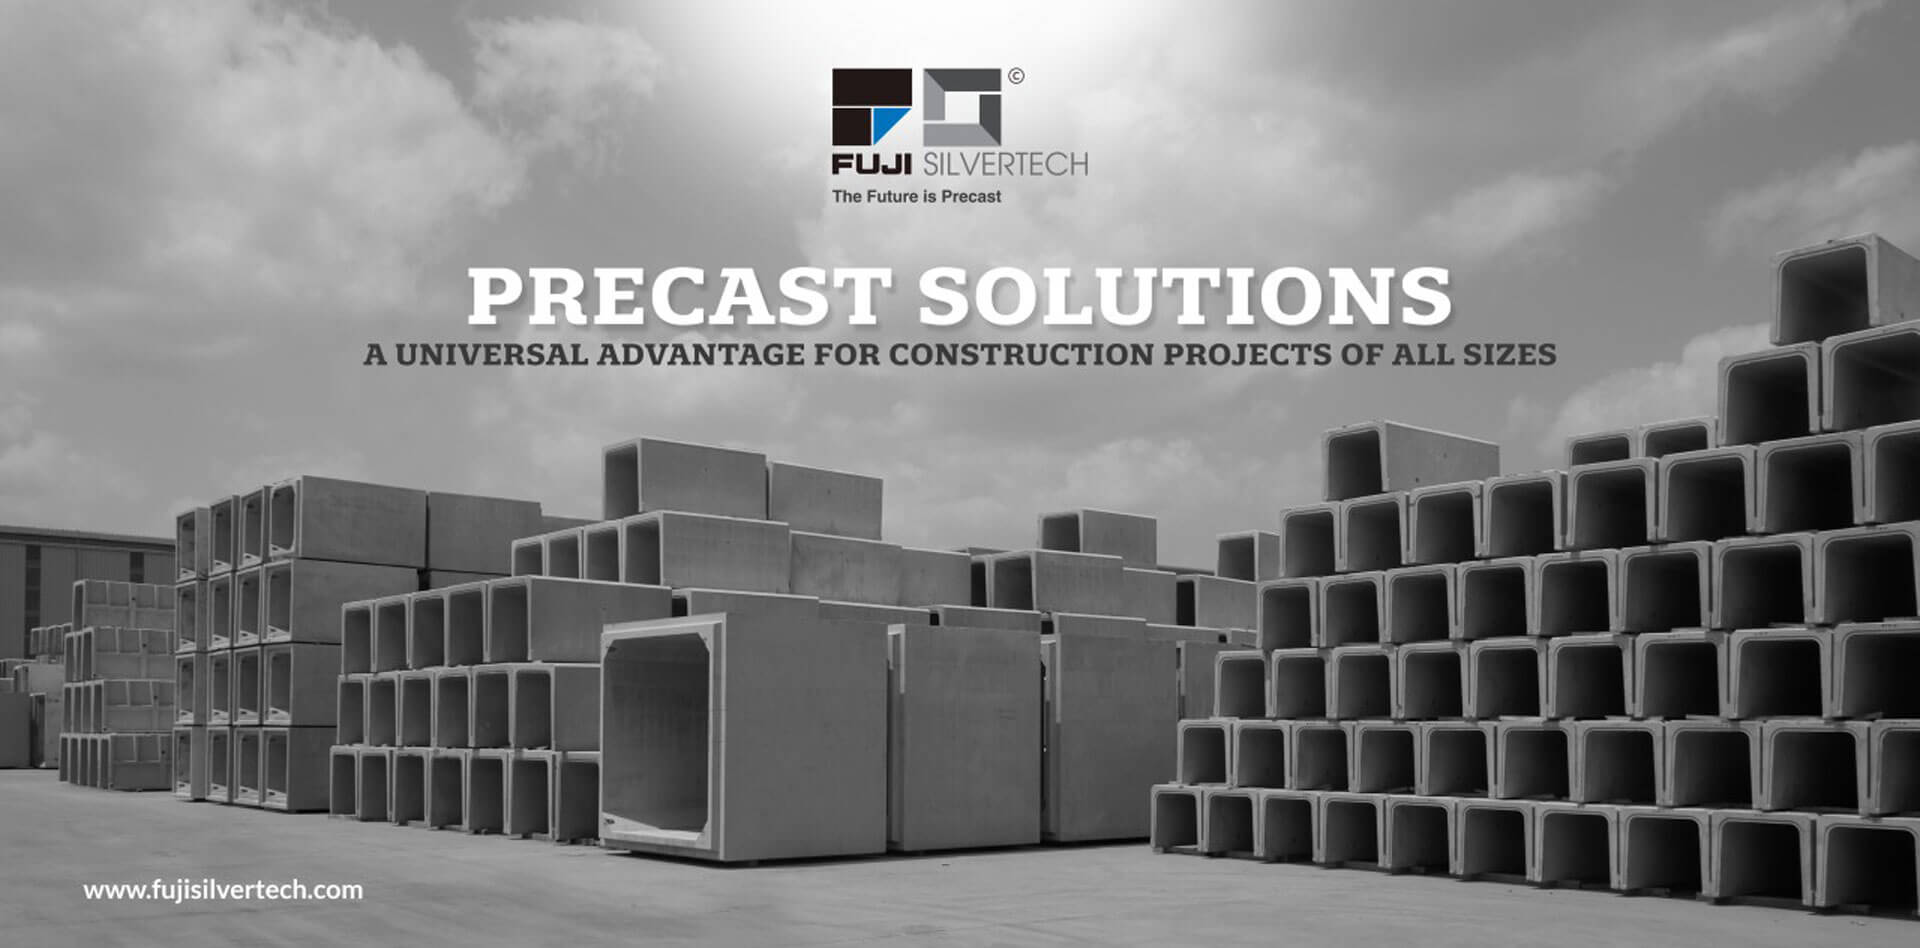 Precast Now and Forever